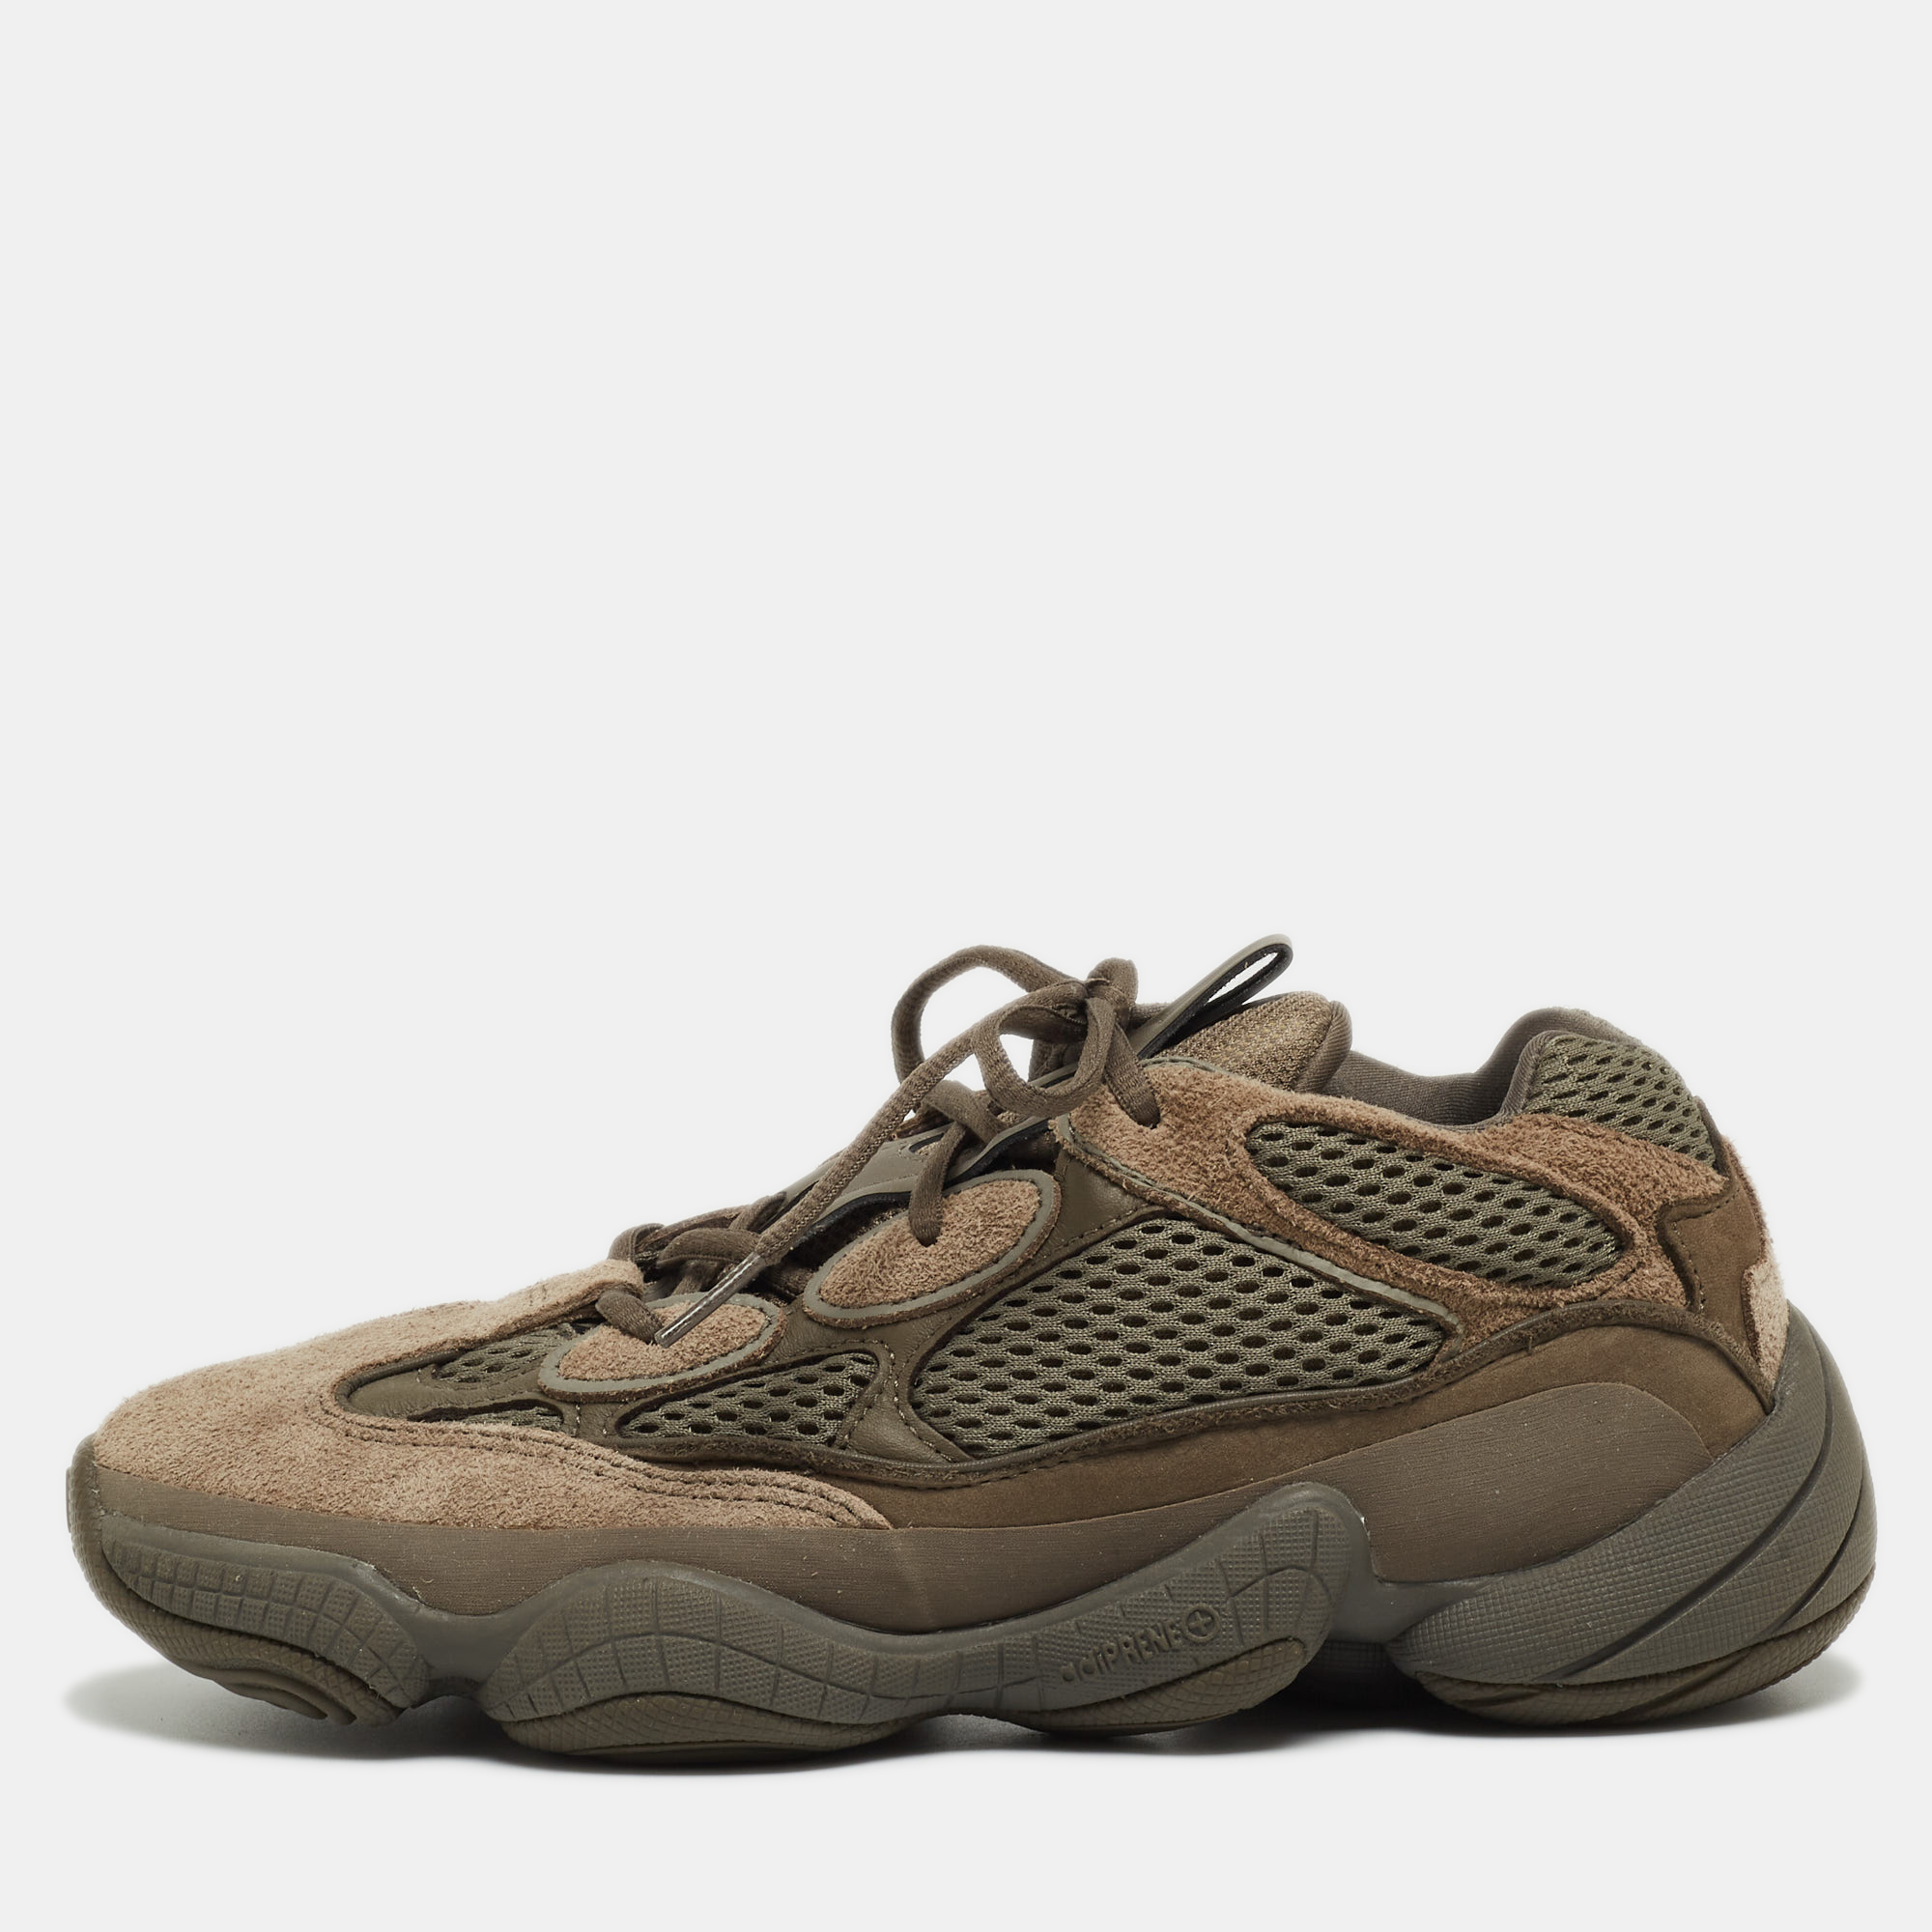 Pre-owned Yeezy X Adidas Two Tone Mesh And Suede Yeezy 500 Clay Brown Trainers Size 41 1/3